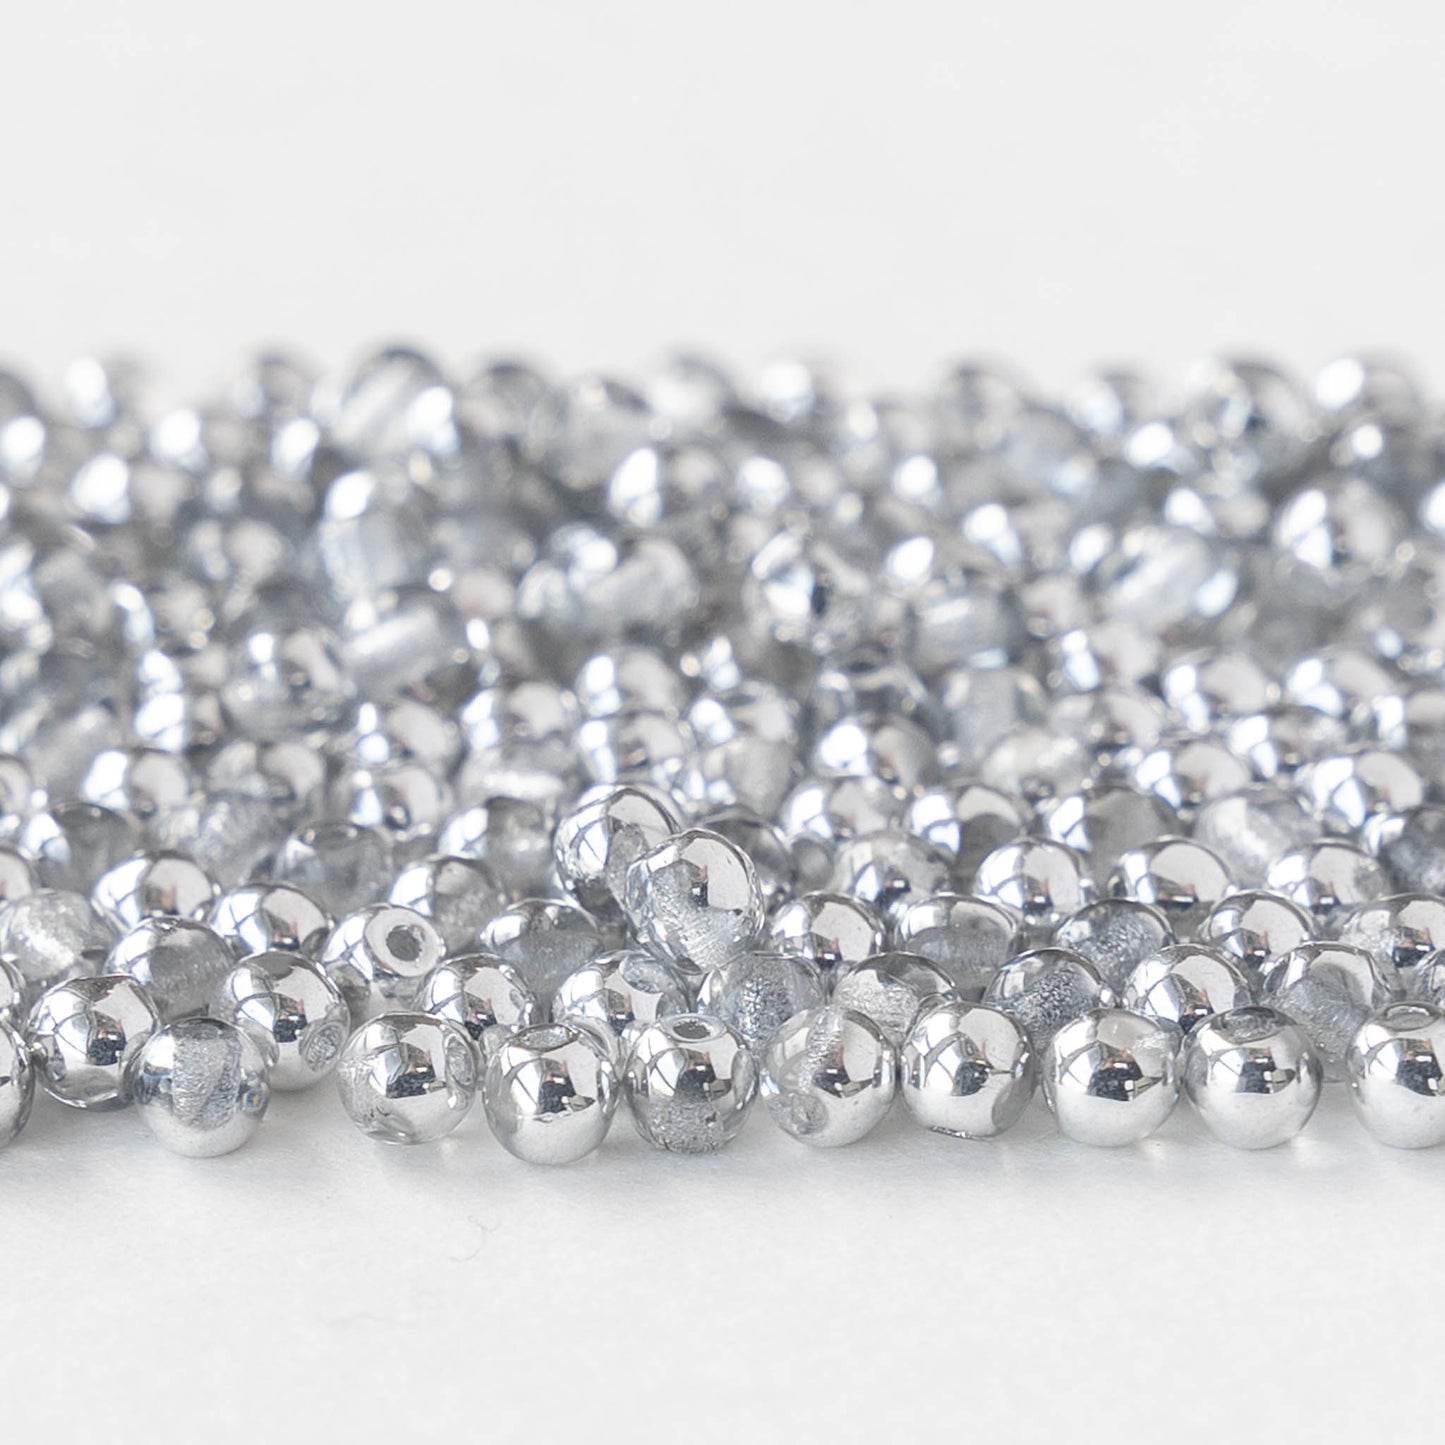 3mm Round Glass Beads - Crystal with Silver - 100 Beads